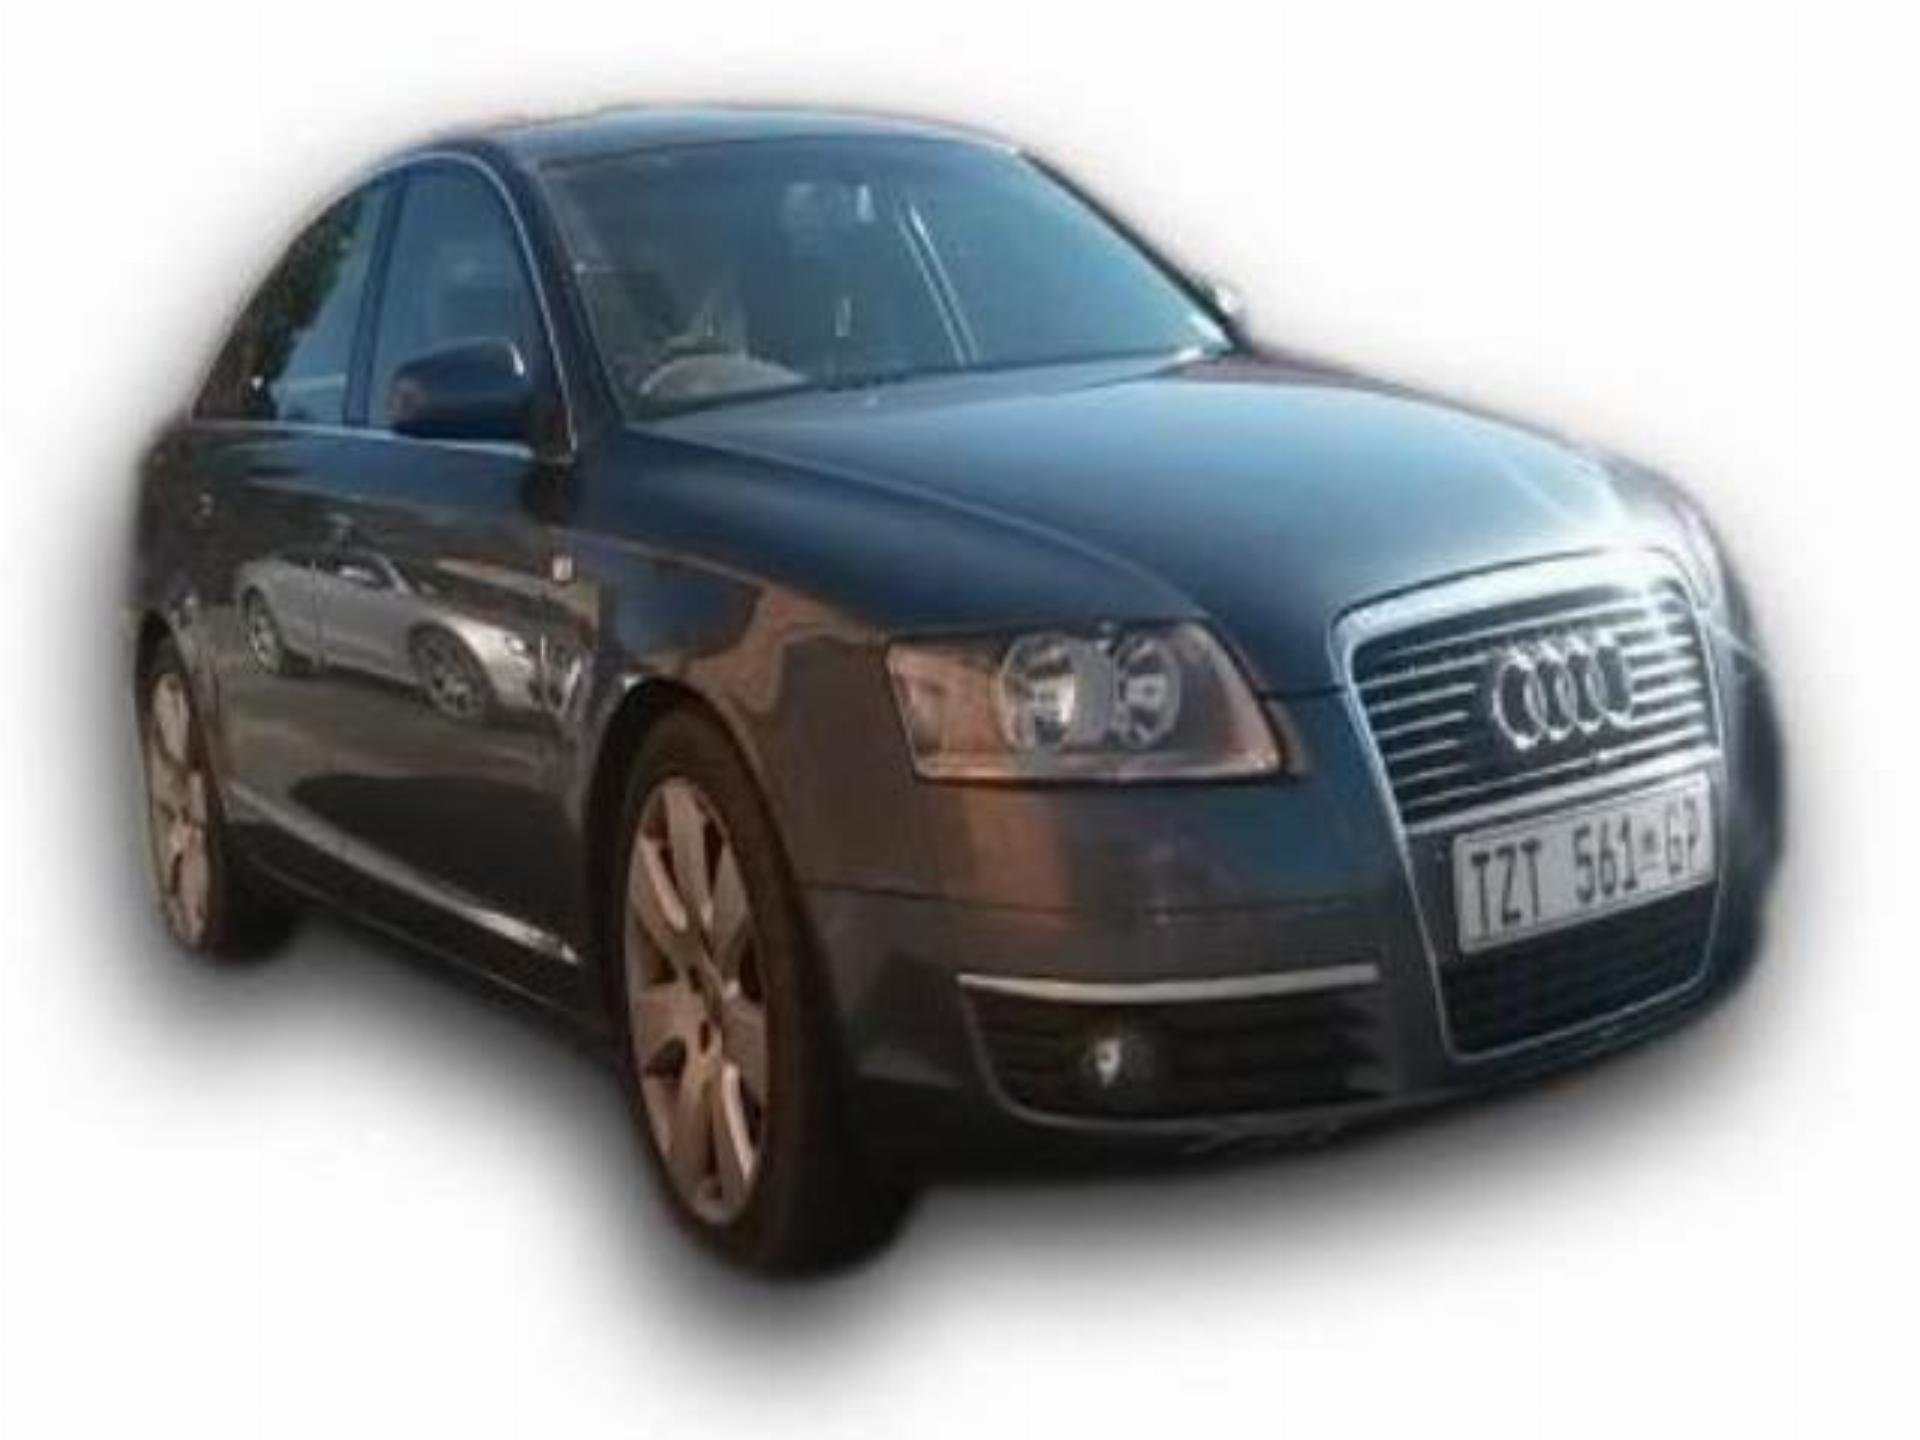 Audi A6 3.2 V6 Engine With All Wheel Drive